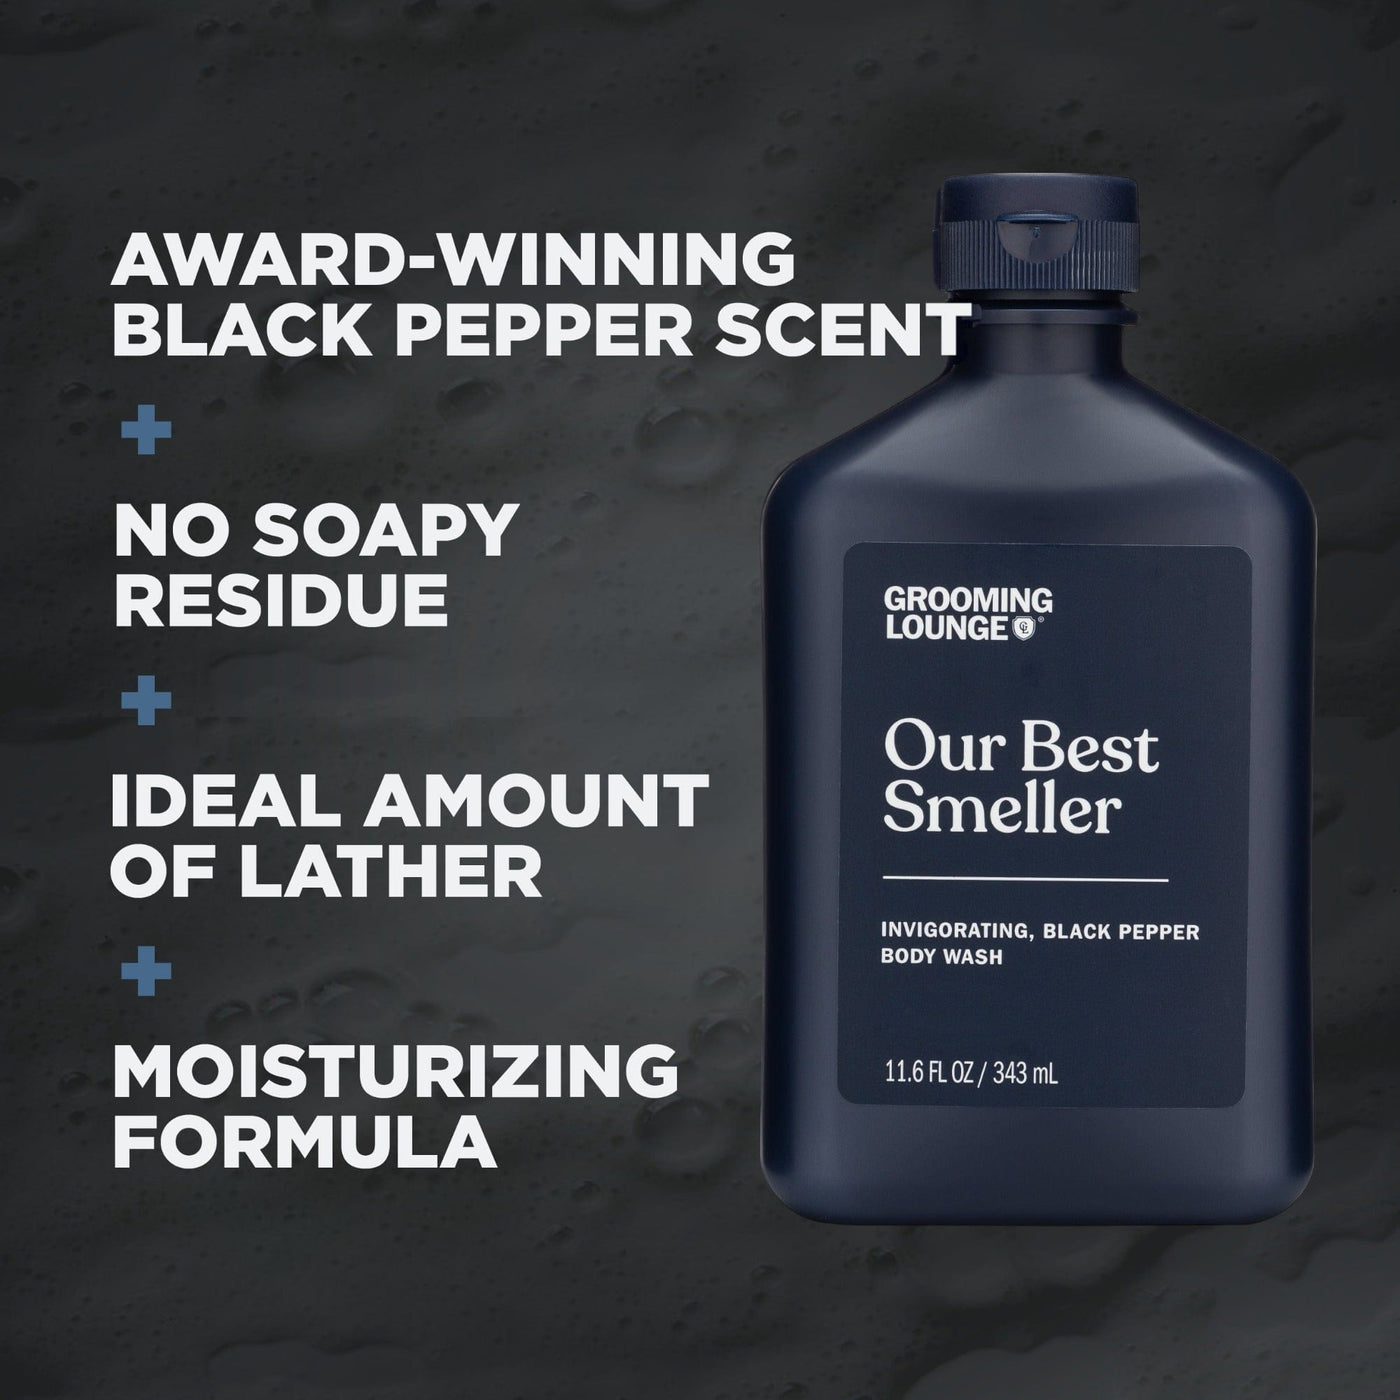 Grooming Lounge Our Best Smeller Body Wash by Grooming Lounge